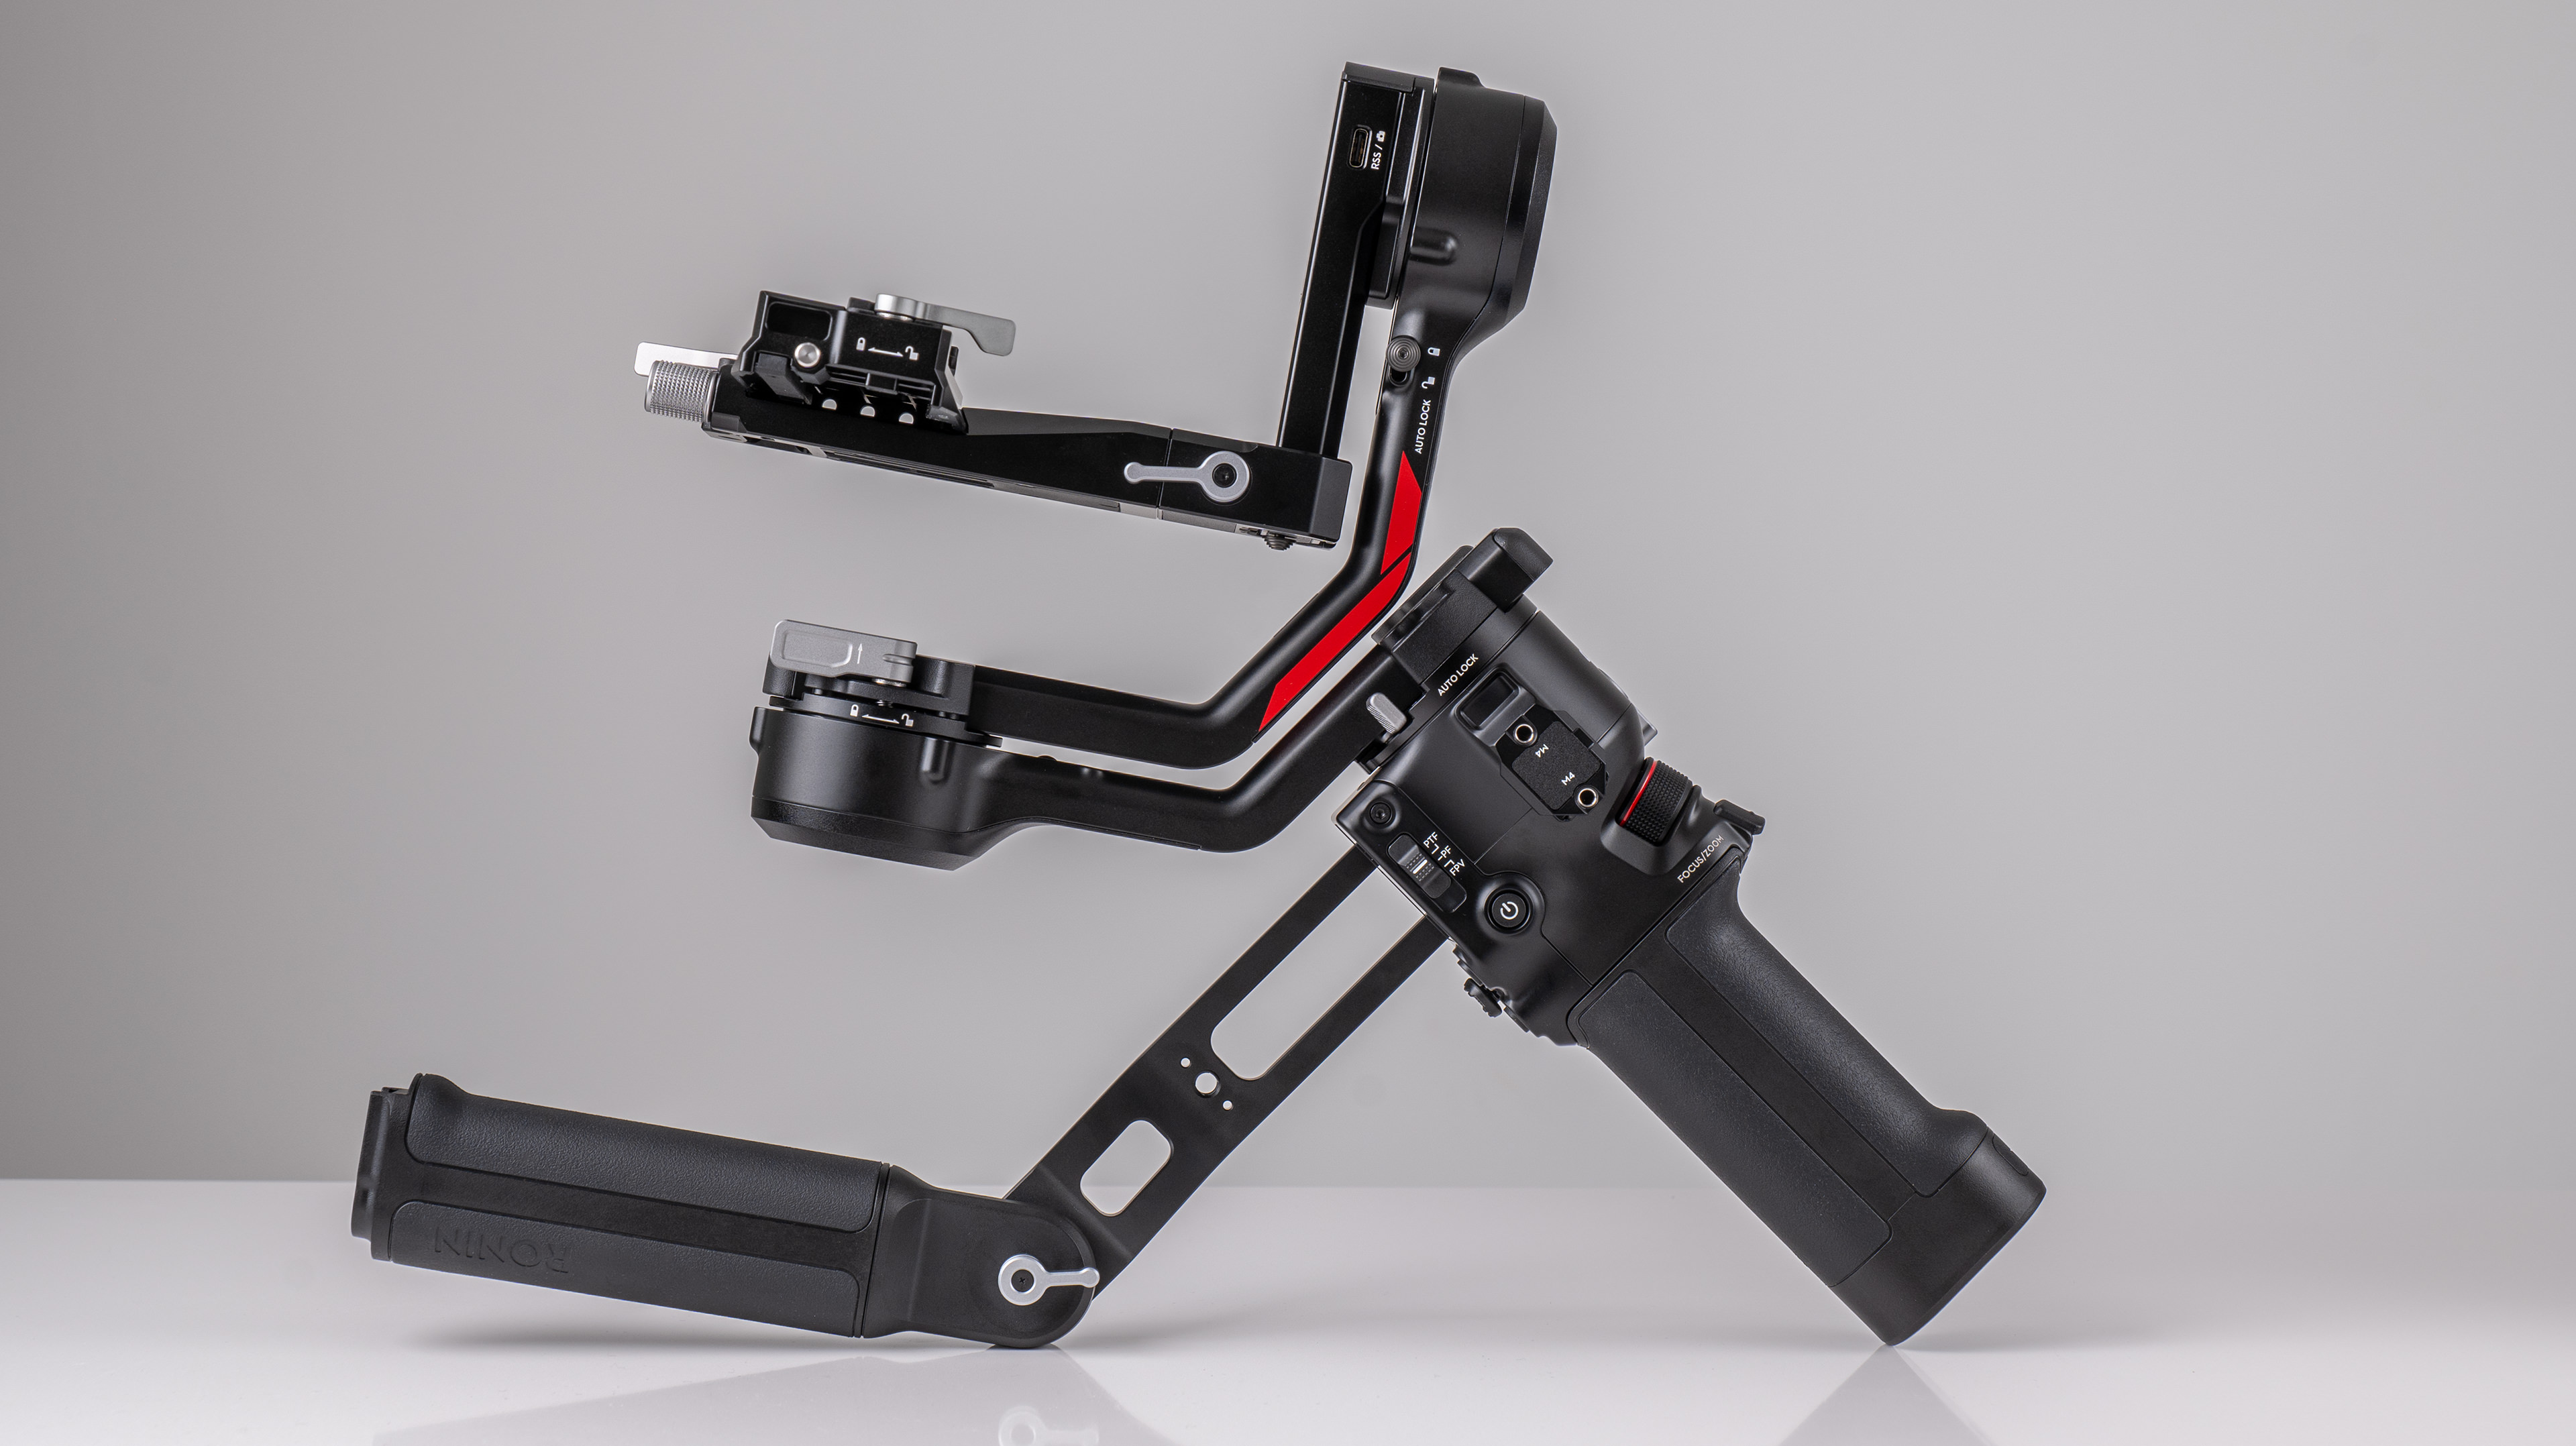 DJI RS 4 gimbal on a off-white background no camera attached